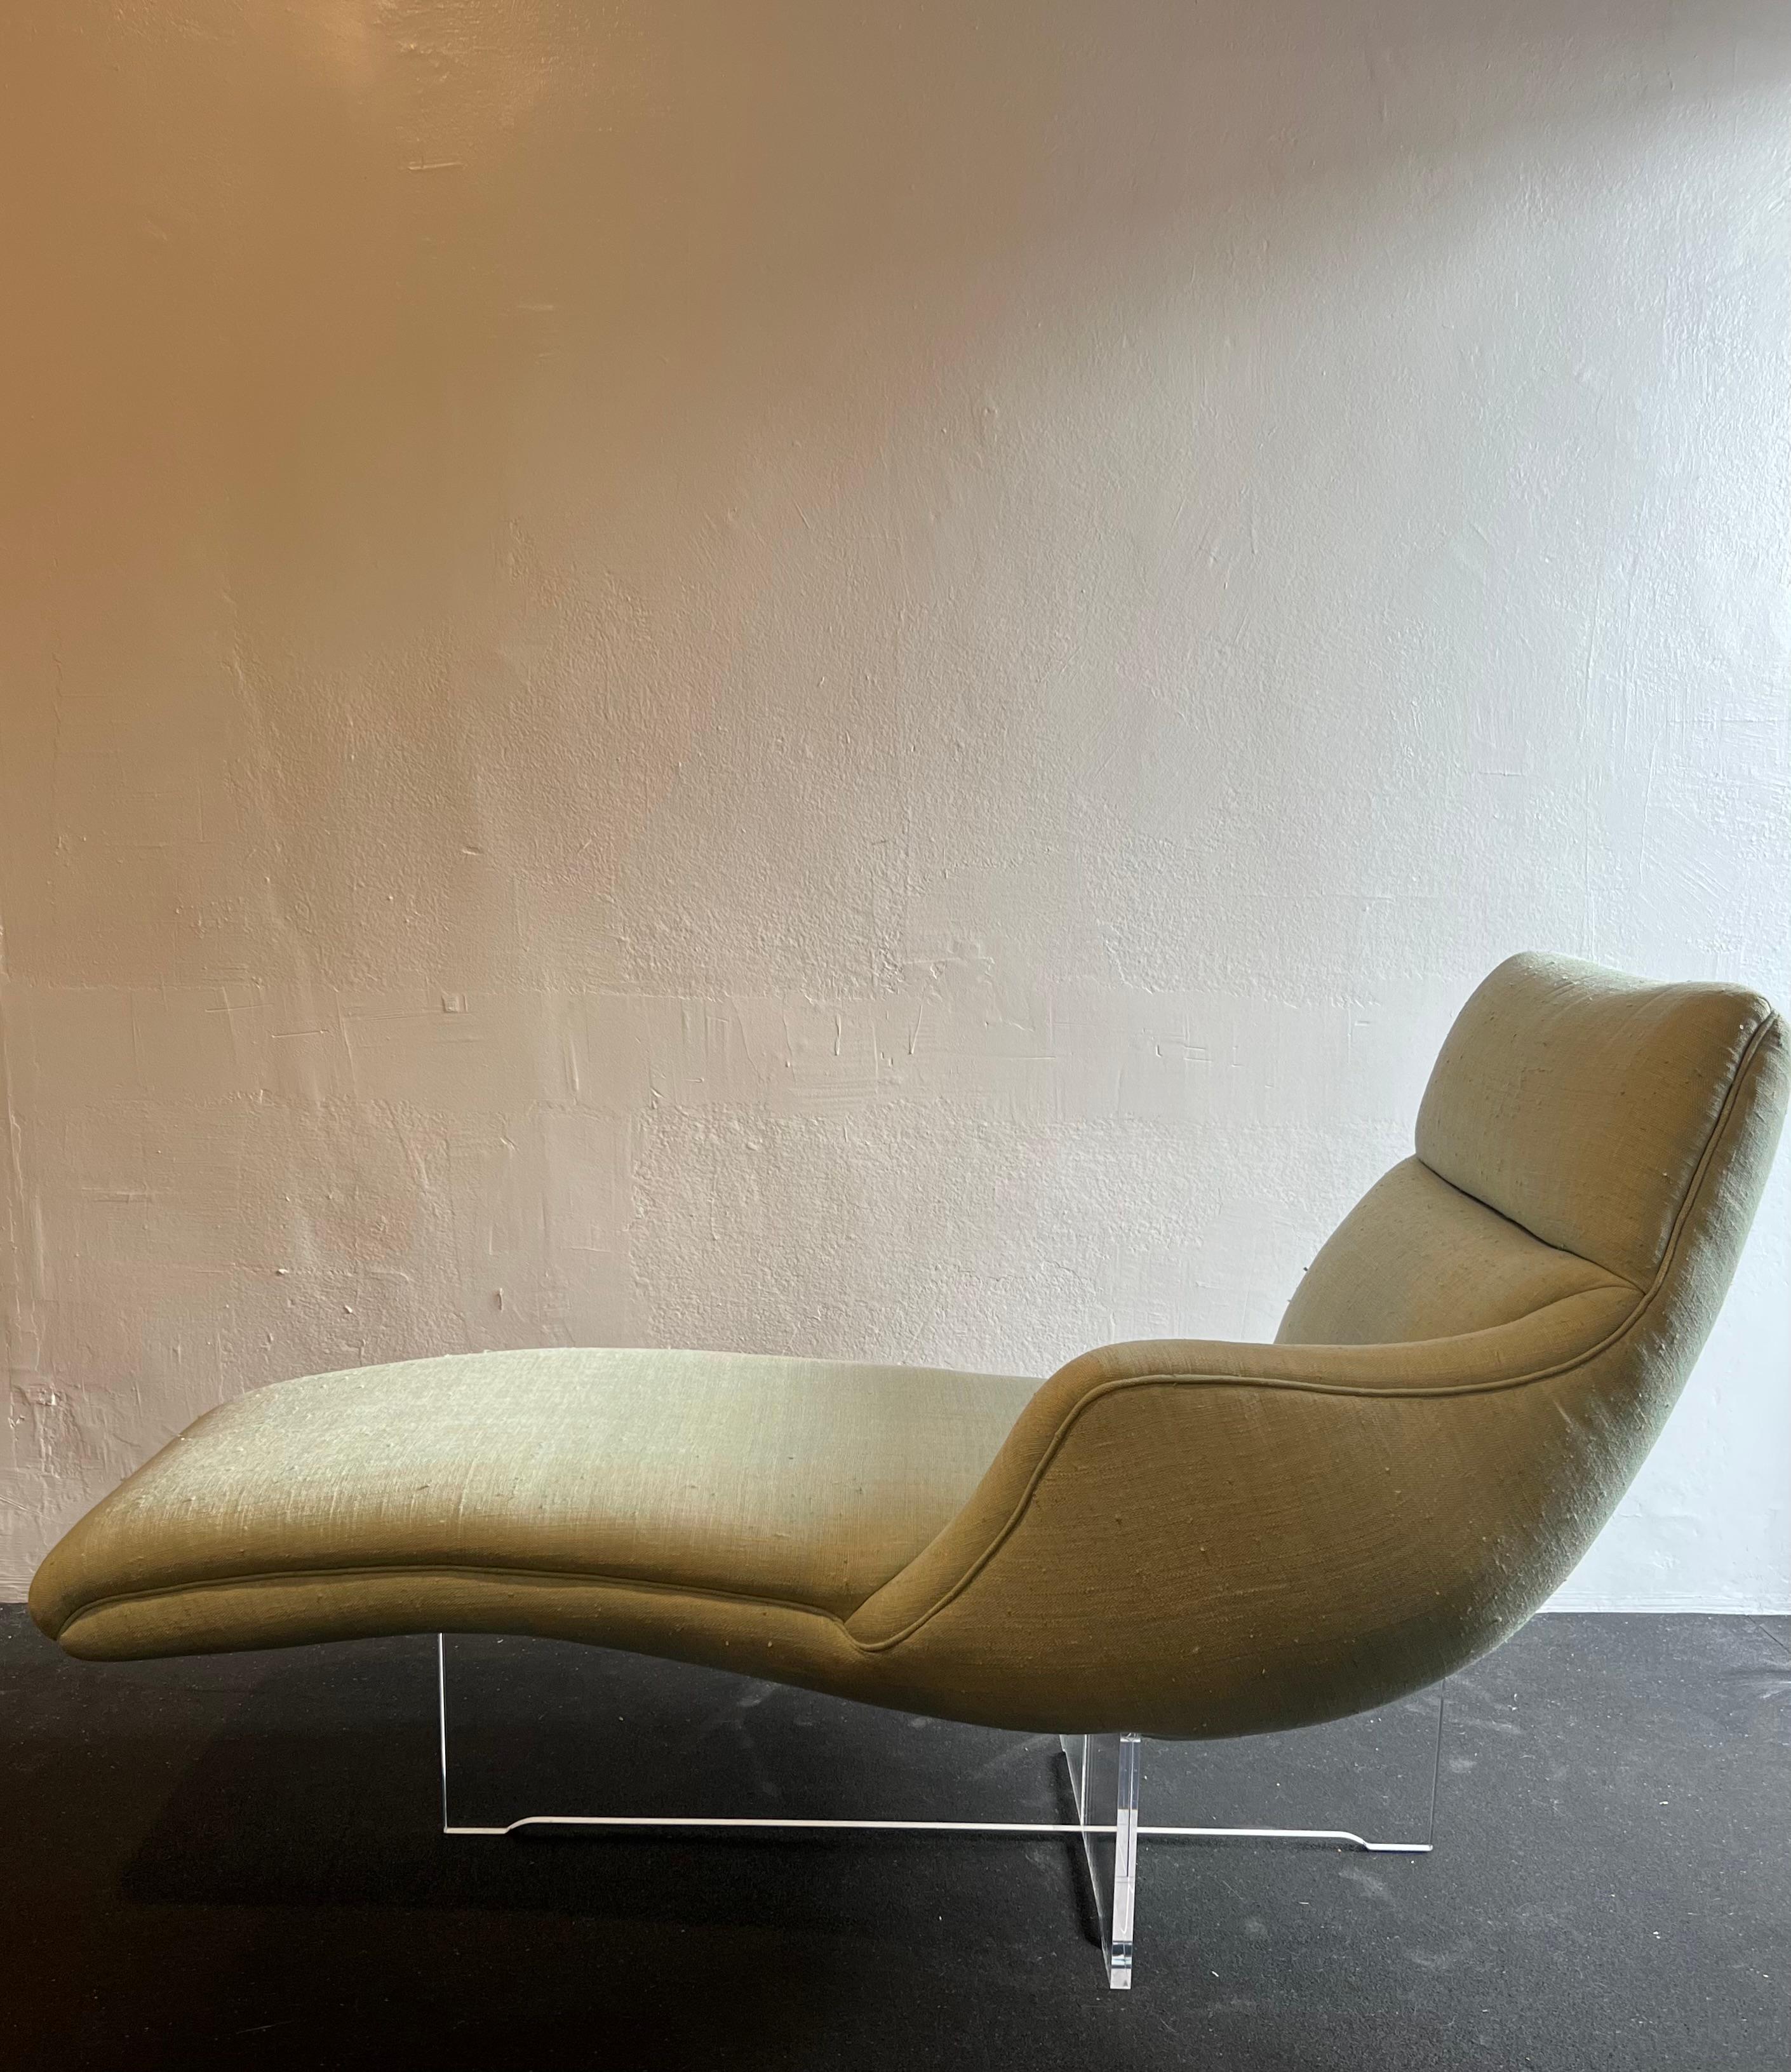 Vladimir Kagan Erica Chaise Lounge In Good Condition For Sale In West Palm Beach, FL